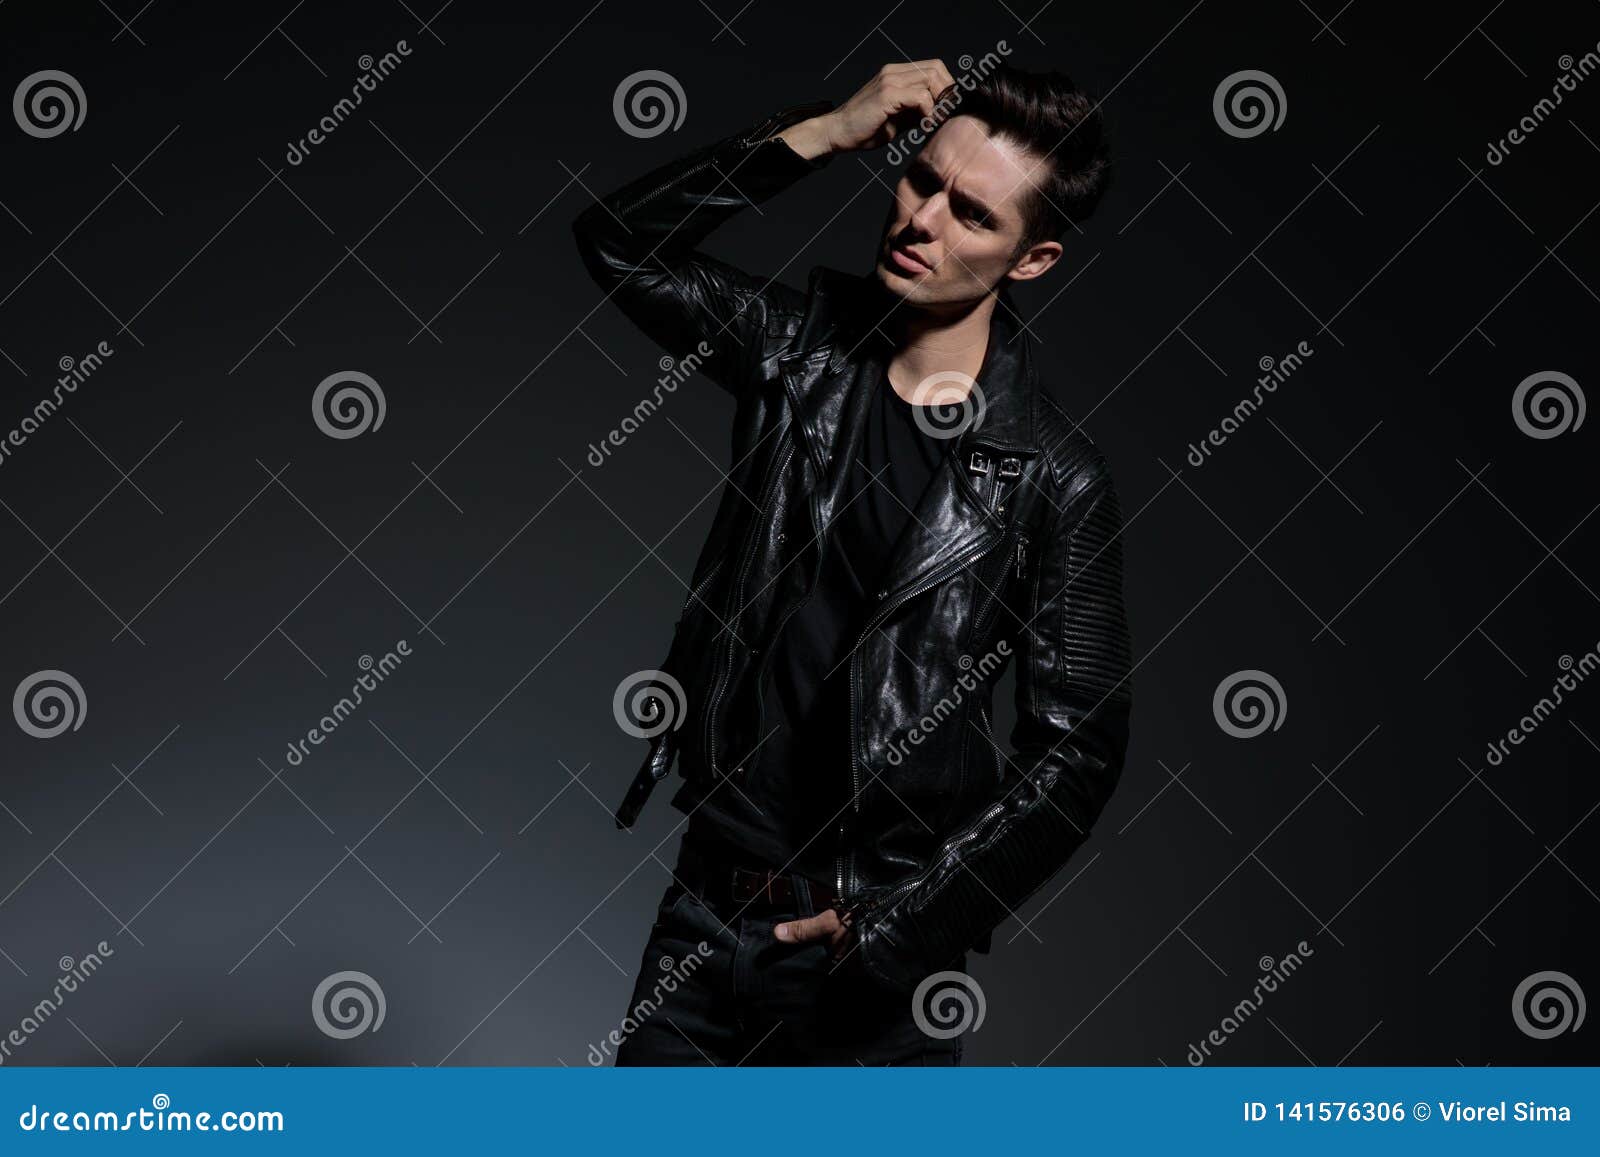 Dramatic Young Man in Leather Jacket Fixes His Hairstyle Stock Photo ...